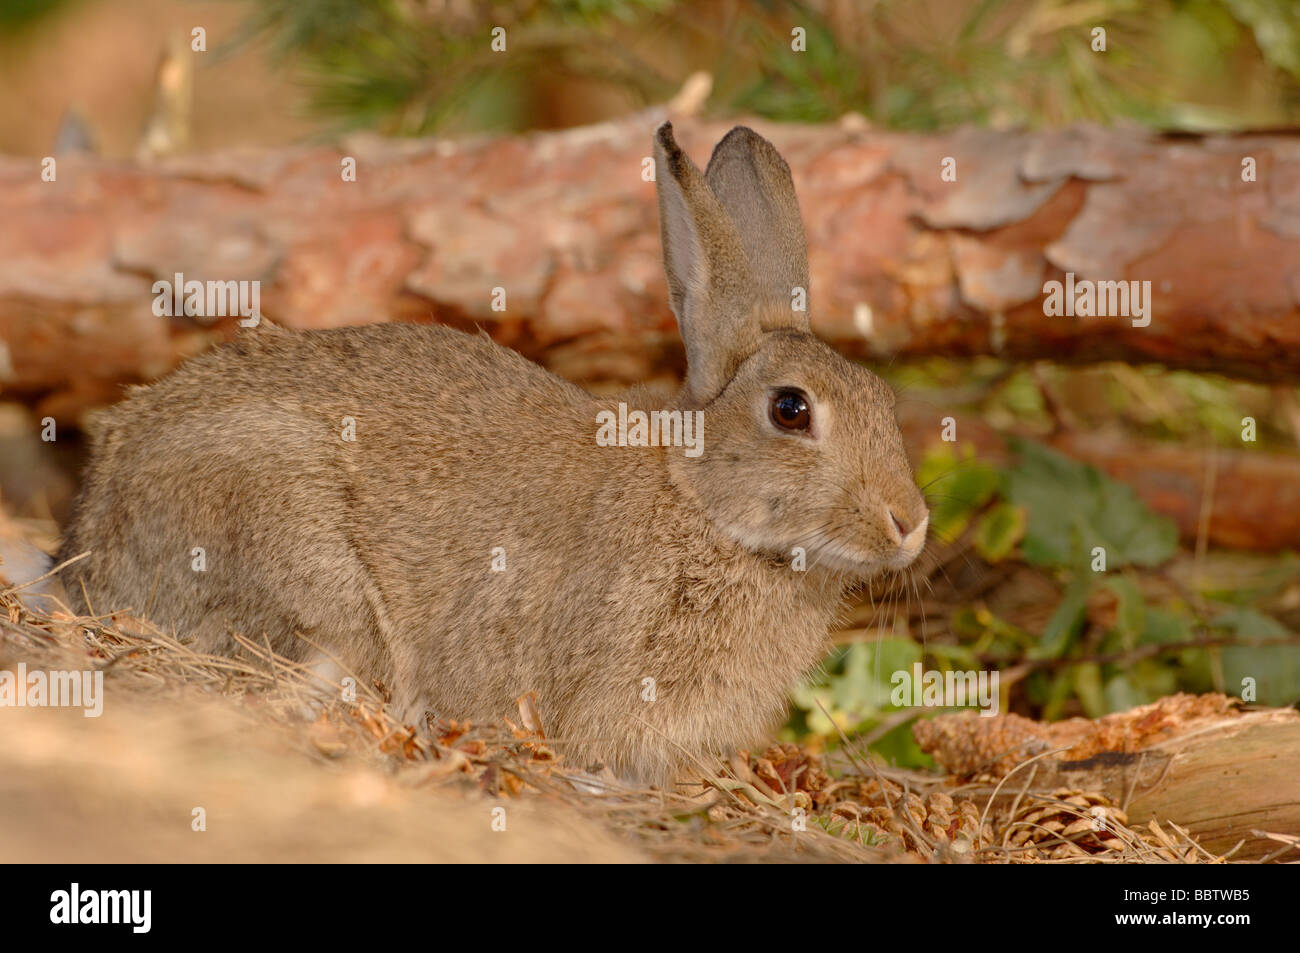 Rabbit Oryctolagus cuniculus Photographed in England Stock Photo